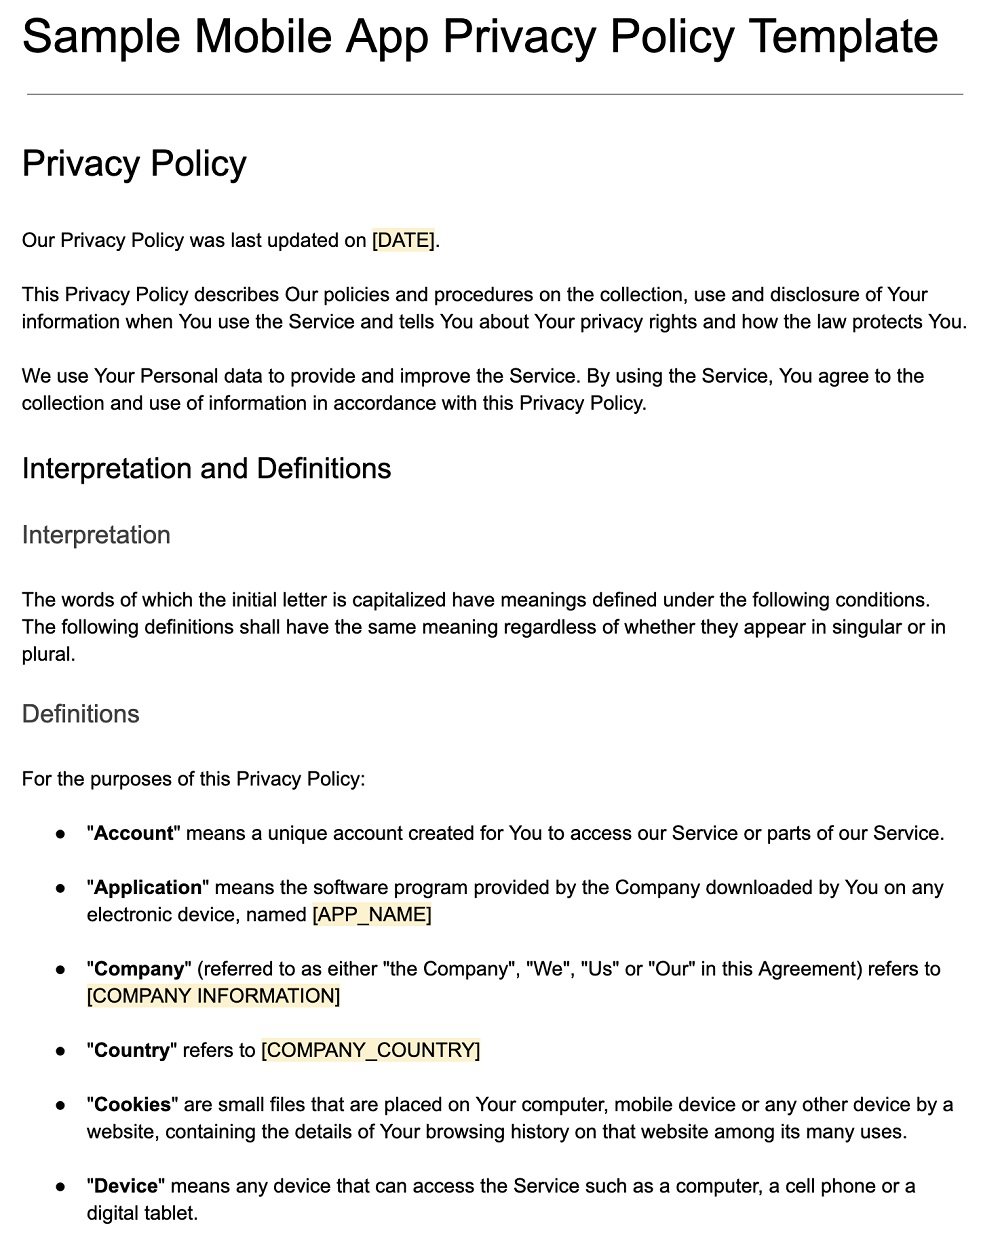 Sample Mobile App Privacy Policy Template - TermsFeed With Regard To Credit Card Privacy Policy Template